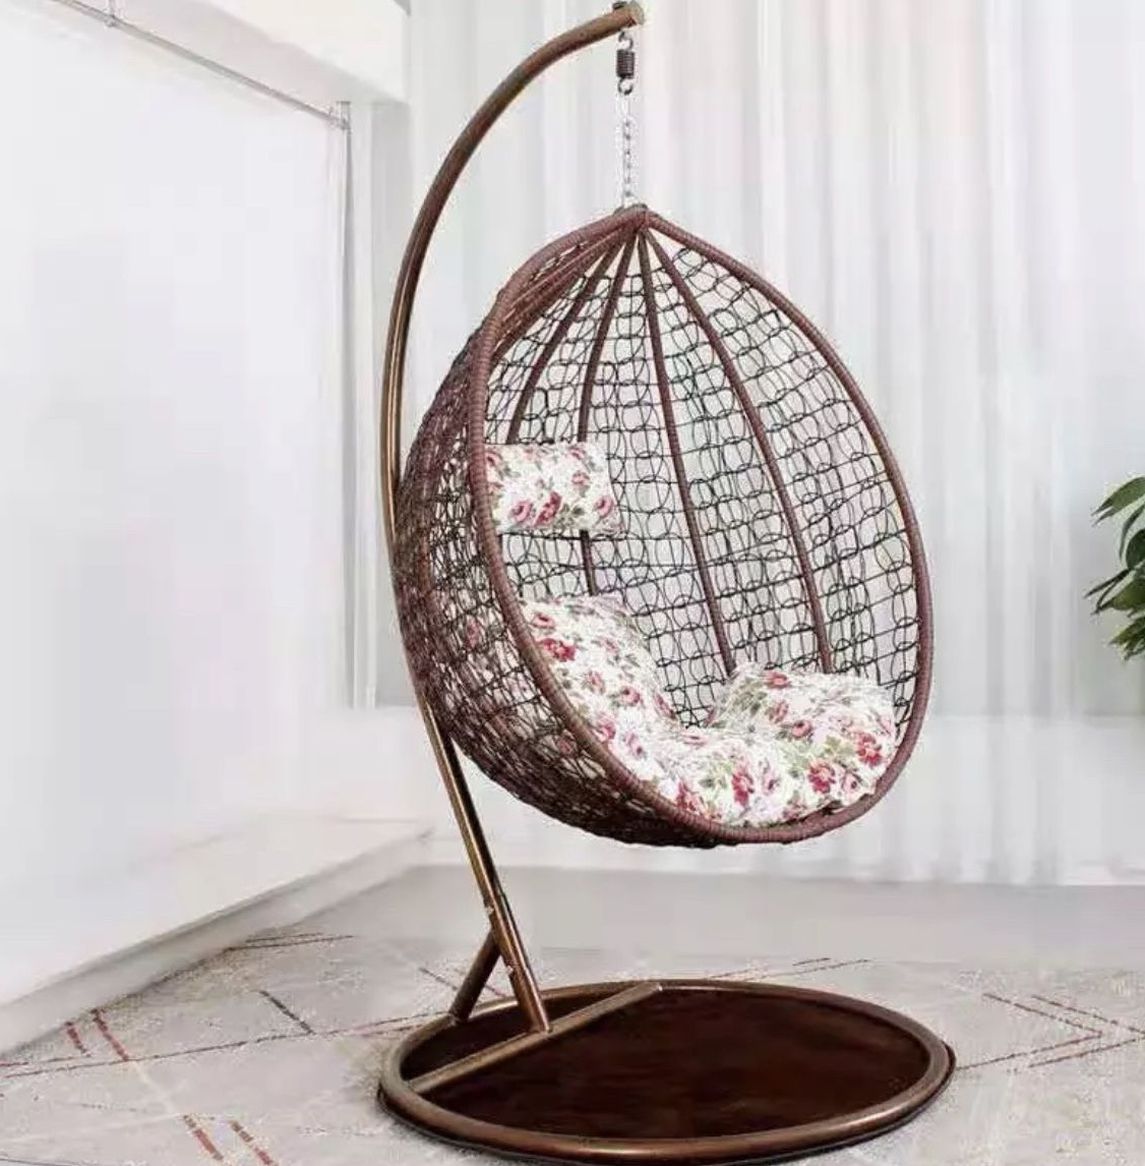 *New* Wicker Style Hanging Egg Chair Patio Porch Lounge Swing with Stand Included Bedroom Furniture